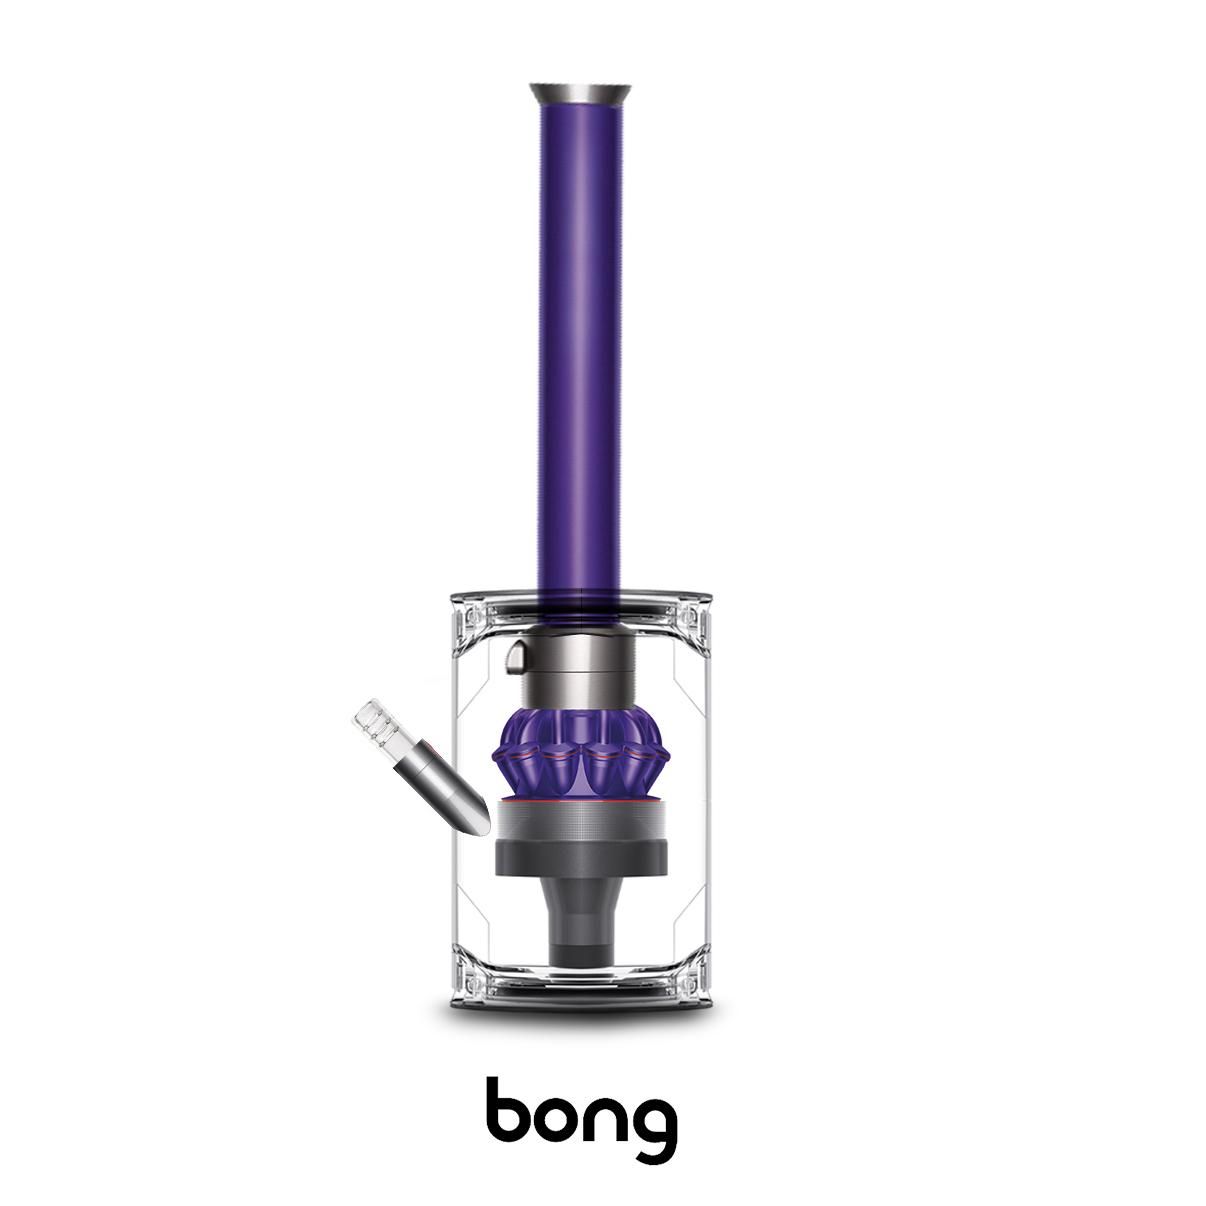 If Dyson made a bong...